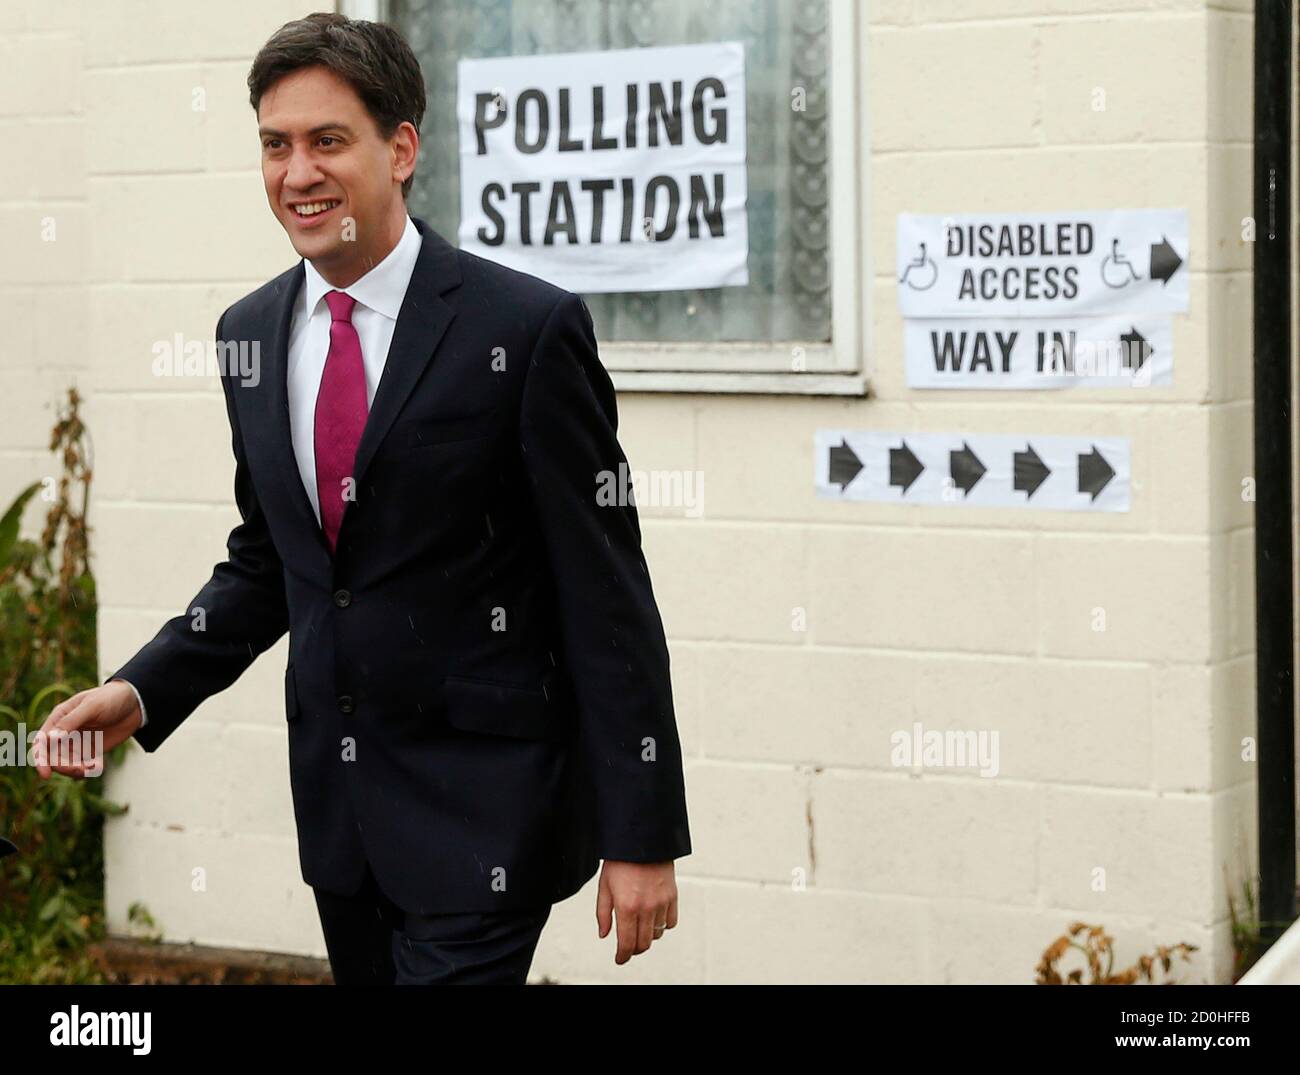 Britain's leader of the opposition Labour Party, Ed Miliband smiles after voting in the local council and European elections at a polling station in the village of Sutton, near Doncaster in northern England May 22, 2014. REUTERS/Phil Noble (BRITAIN - Tags: POLITICS ELECTIONS) Stock Photo